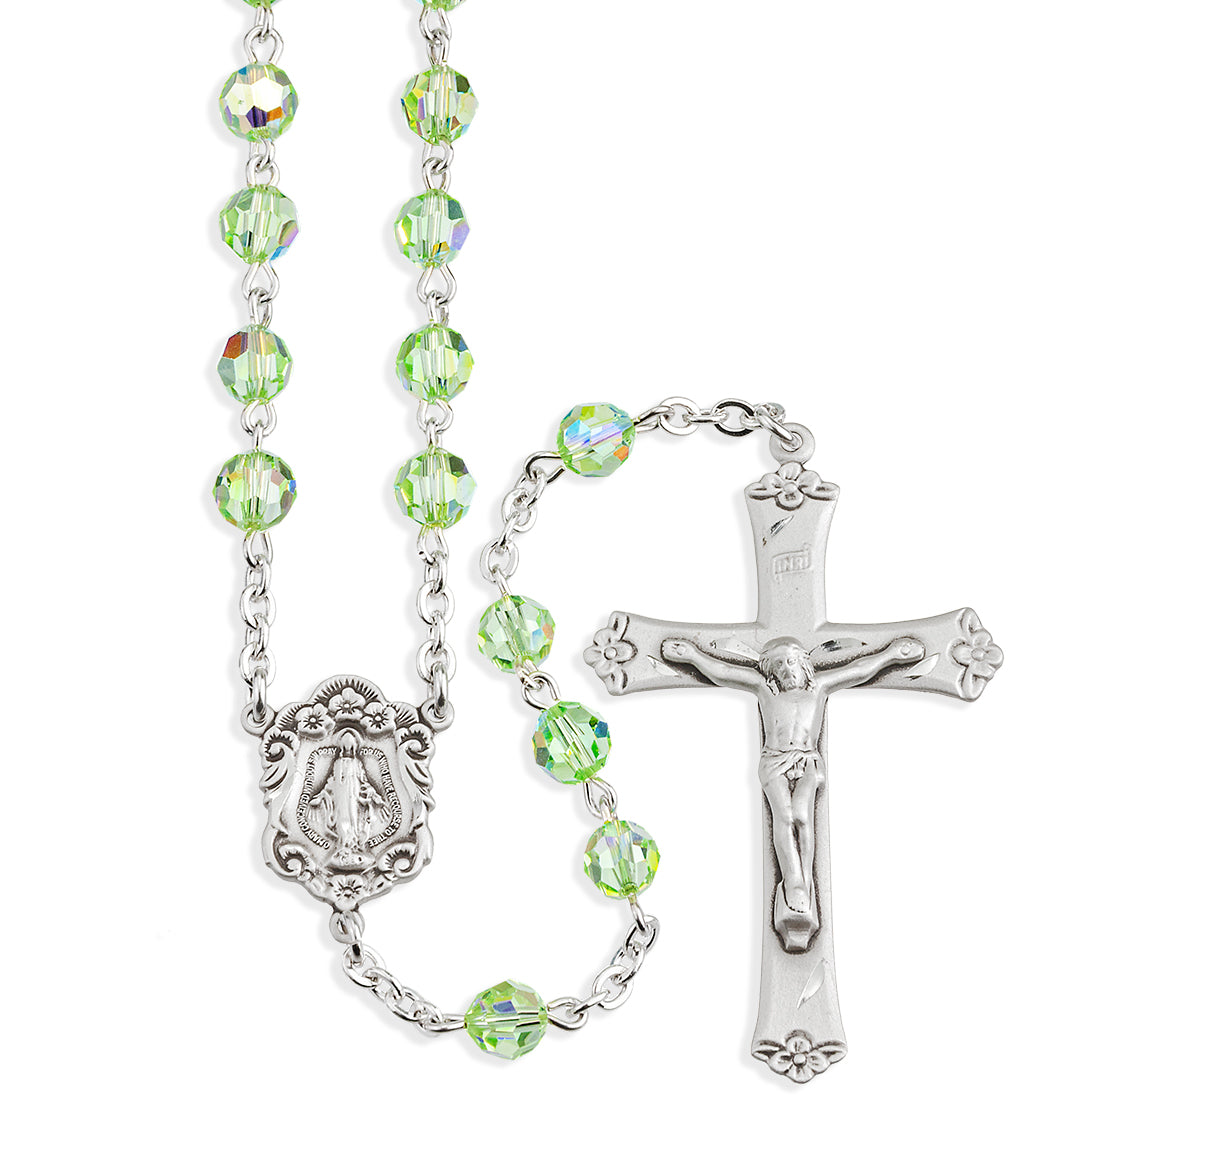 Rosary Sterling Crucifix and Centerpiece Created with Swarovski Crystal 6mm Faceted Round Chrysolite Beads by HMH